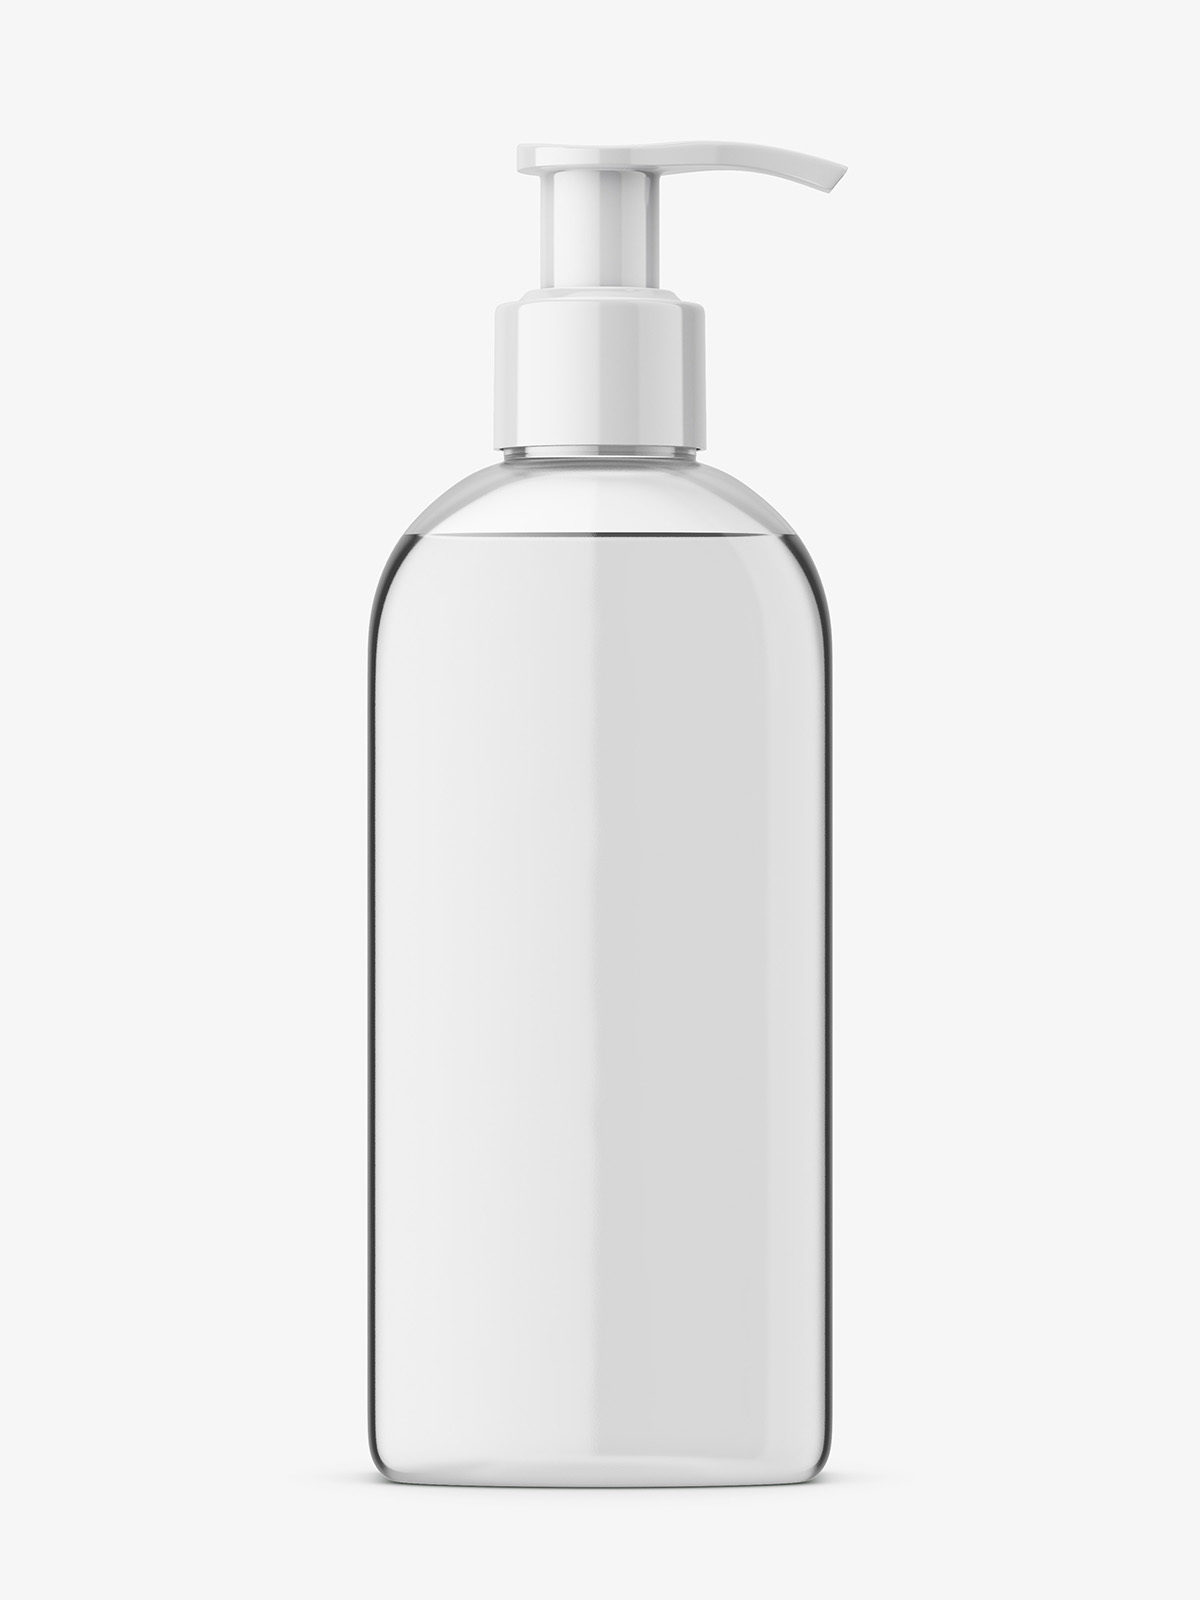 Download White Soap Bottle With Pump Mockup